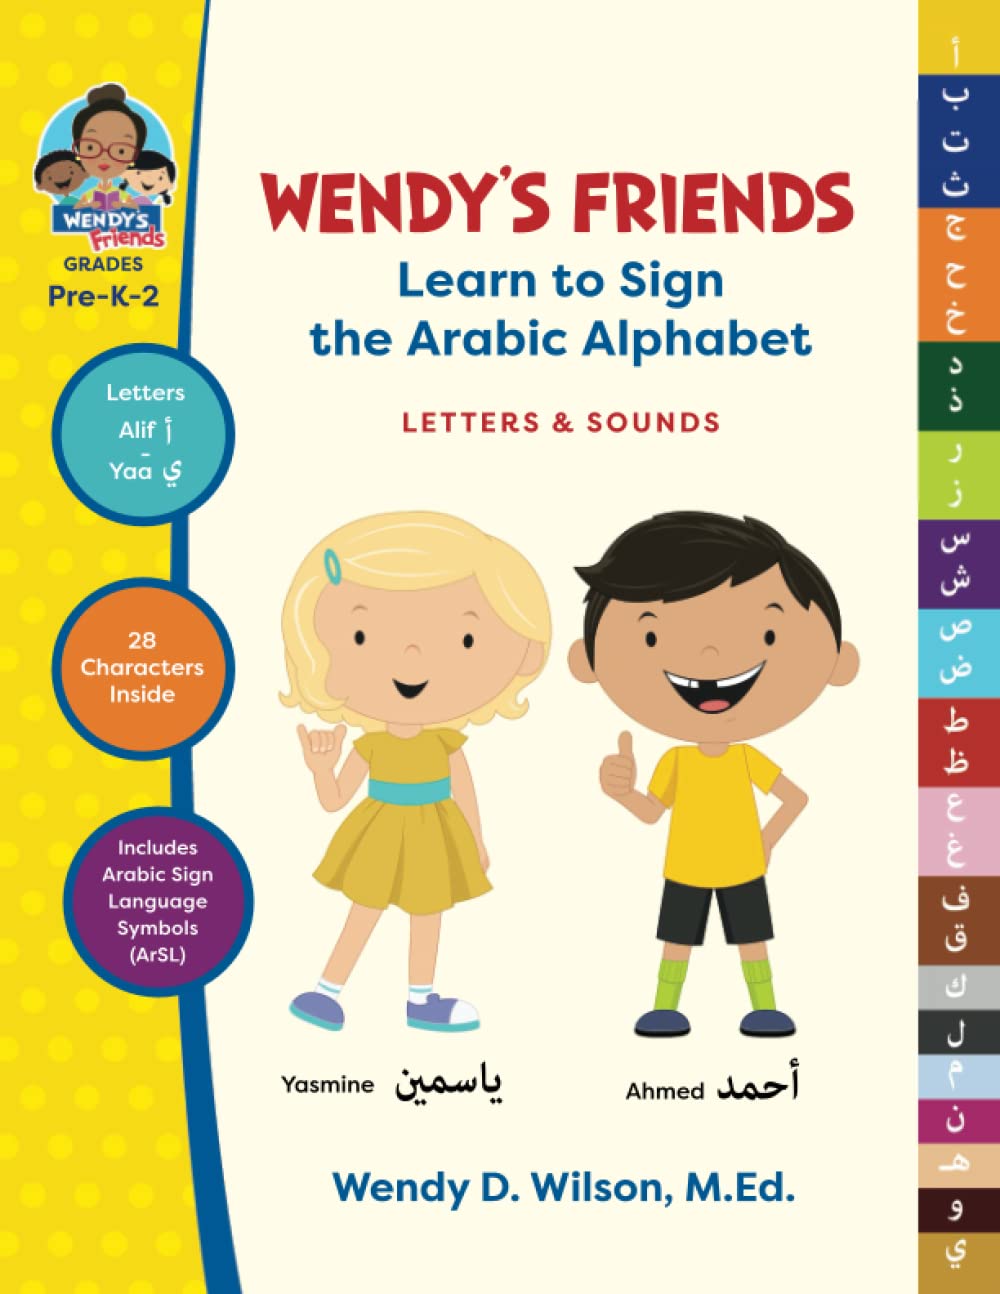 Wendy's Friends Learn to Sign the Arabic Alphabet (ALIF-YAA): Letters and Sounds